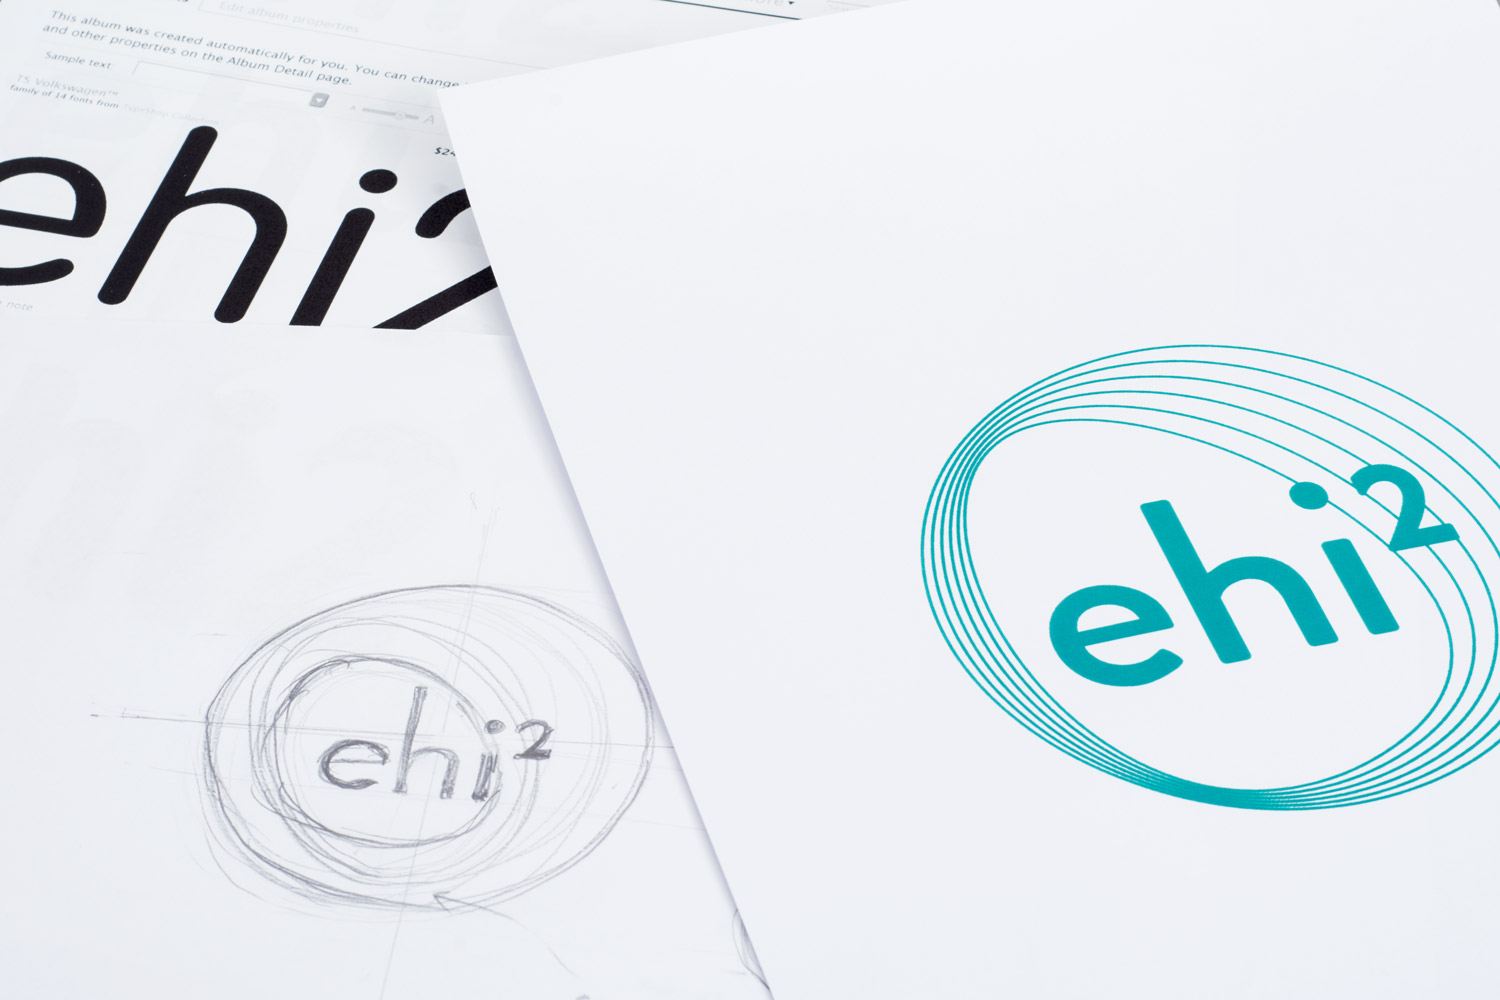 Sketches of the ehi2 logo designs